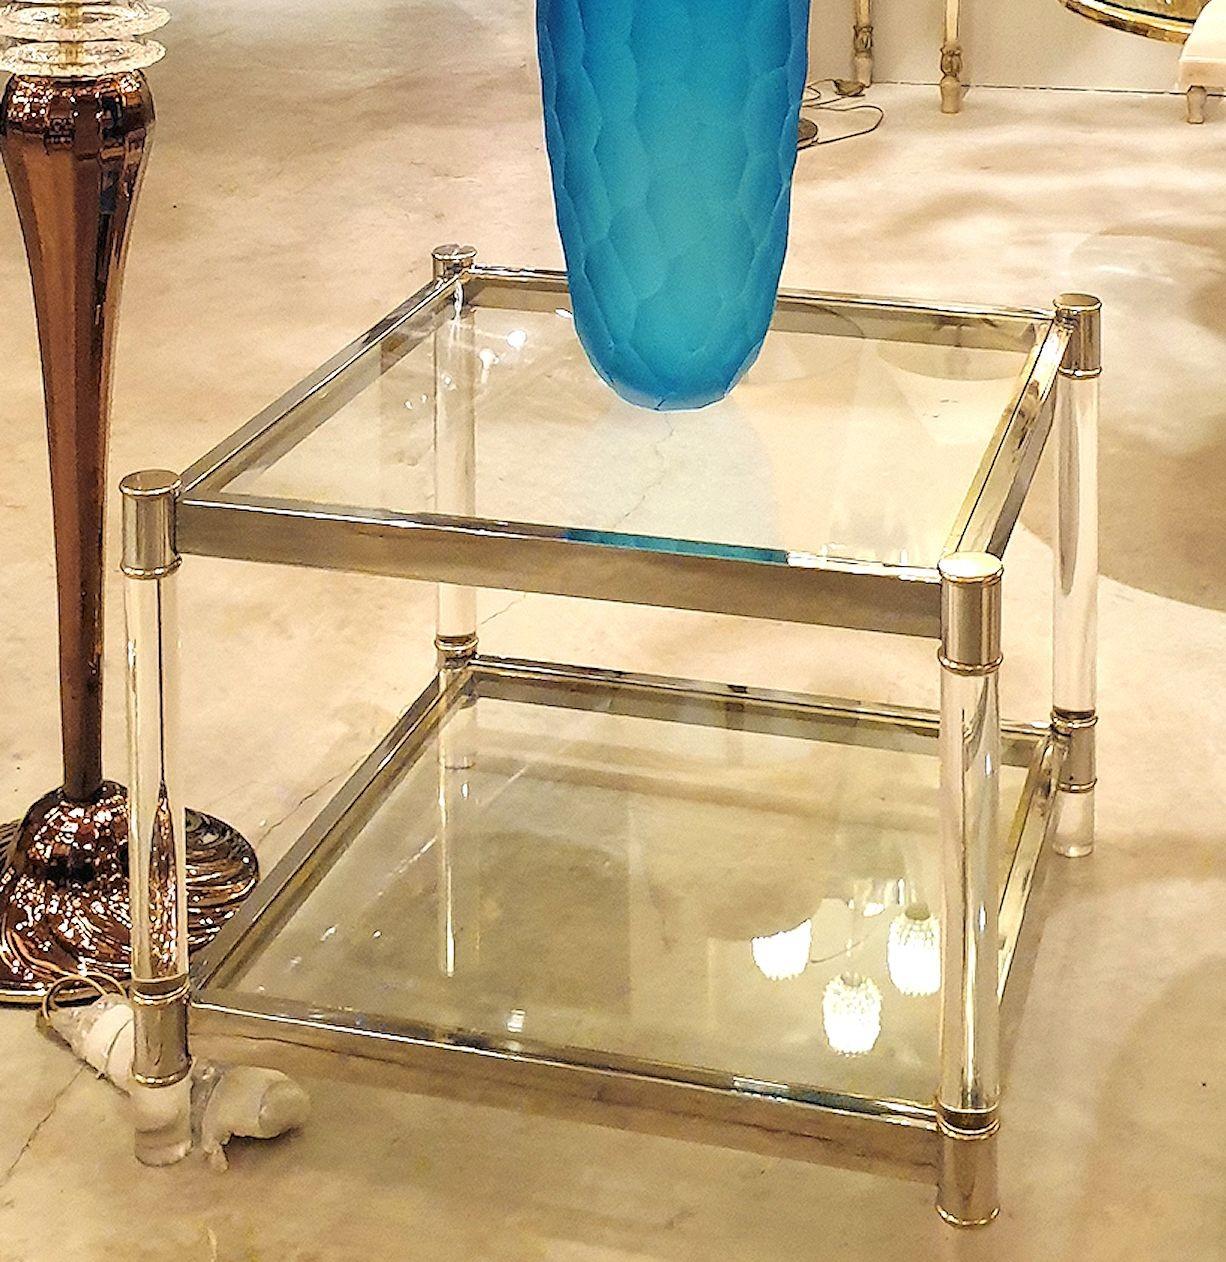 Vintage chrome, lucite and glass square side table with brass accents, attributed to Maison Jansen. France, 1970s.
The coffee table has 2 shelves, in transparent glass: lucite column legs and a two-toned metal finish.
A nice medium size for this